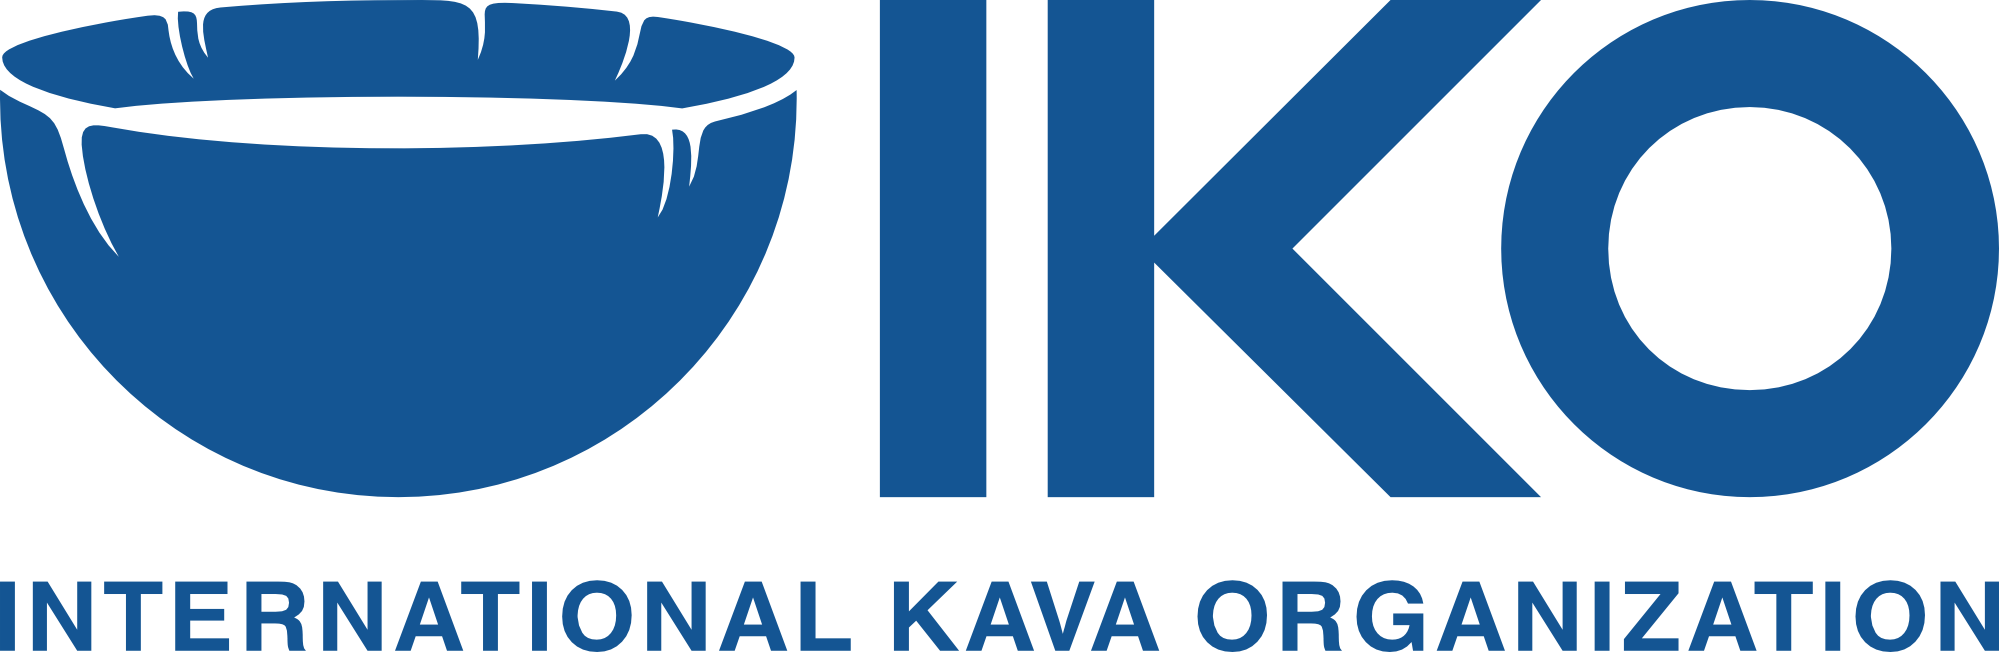 The official logo PNG for the international kava organization (IKO).